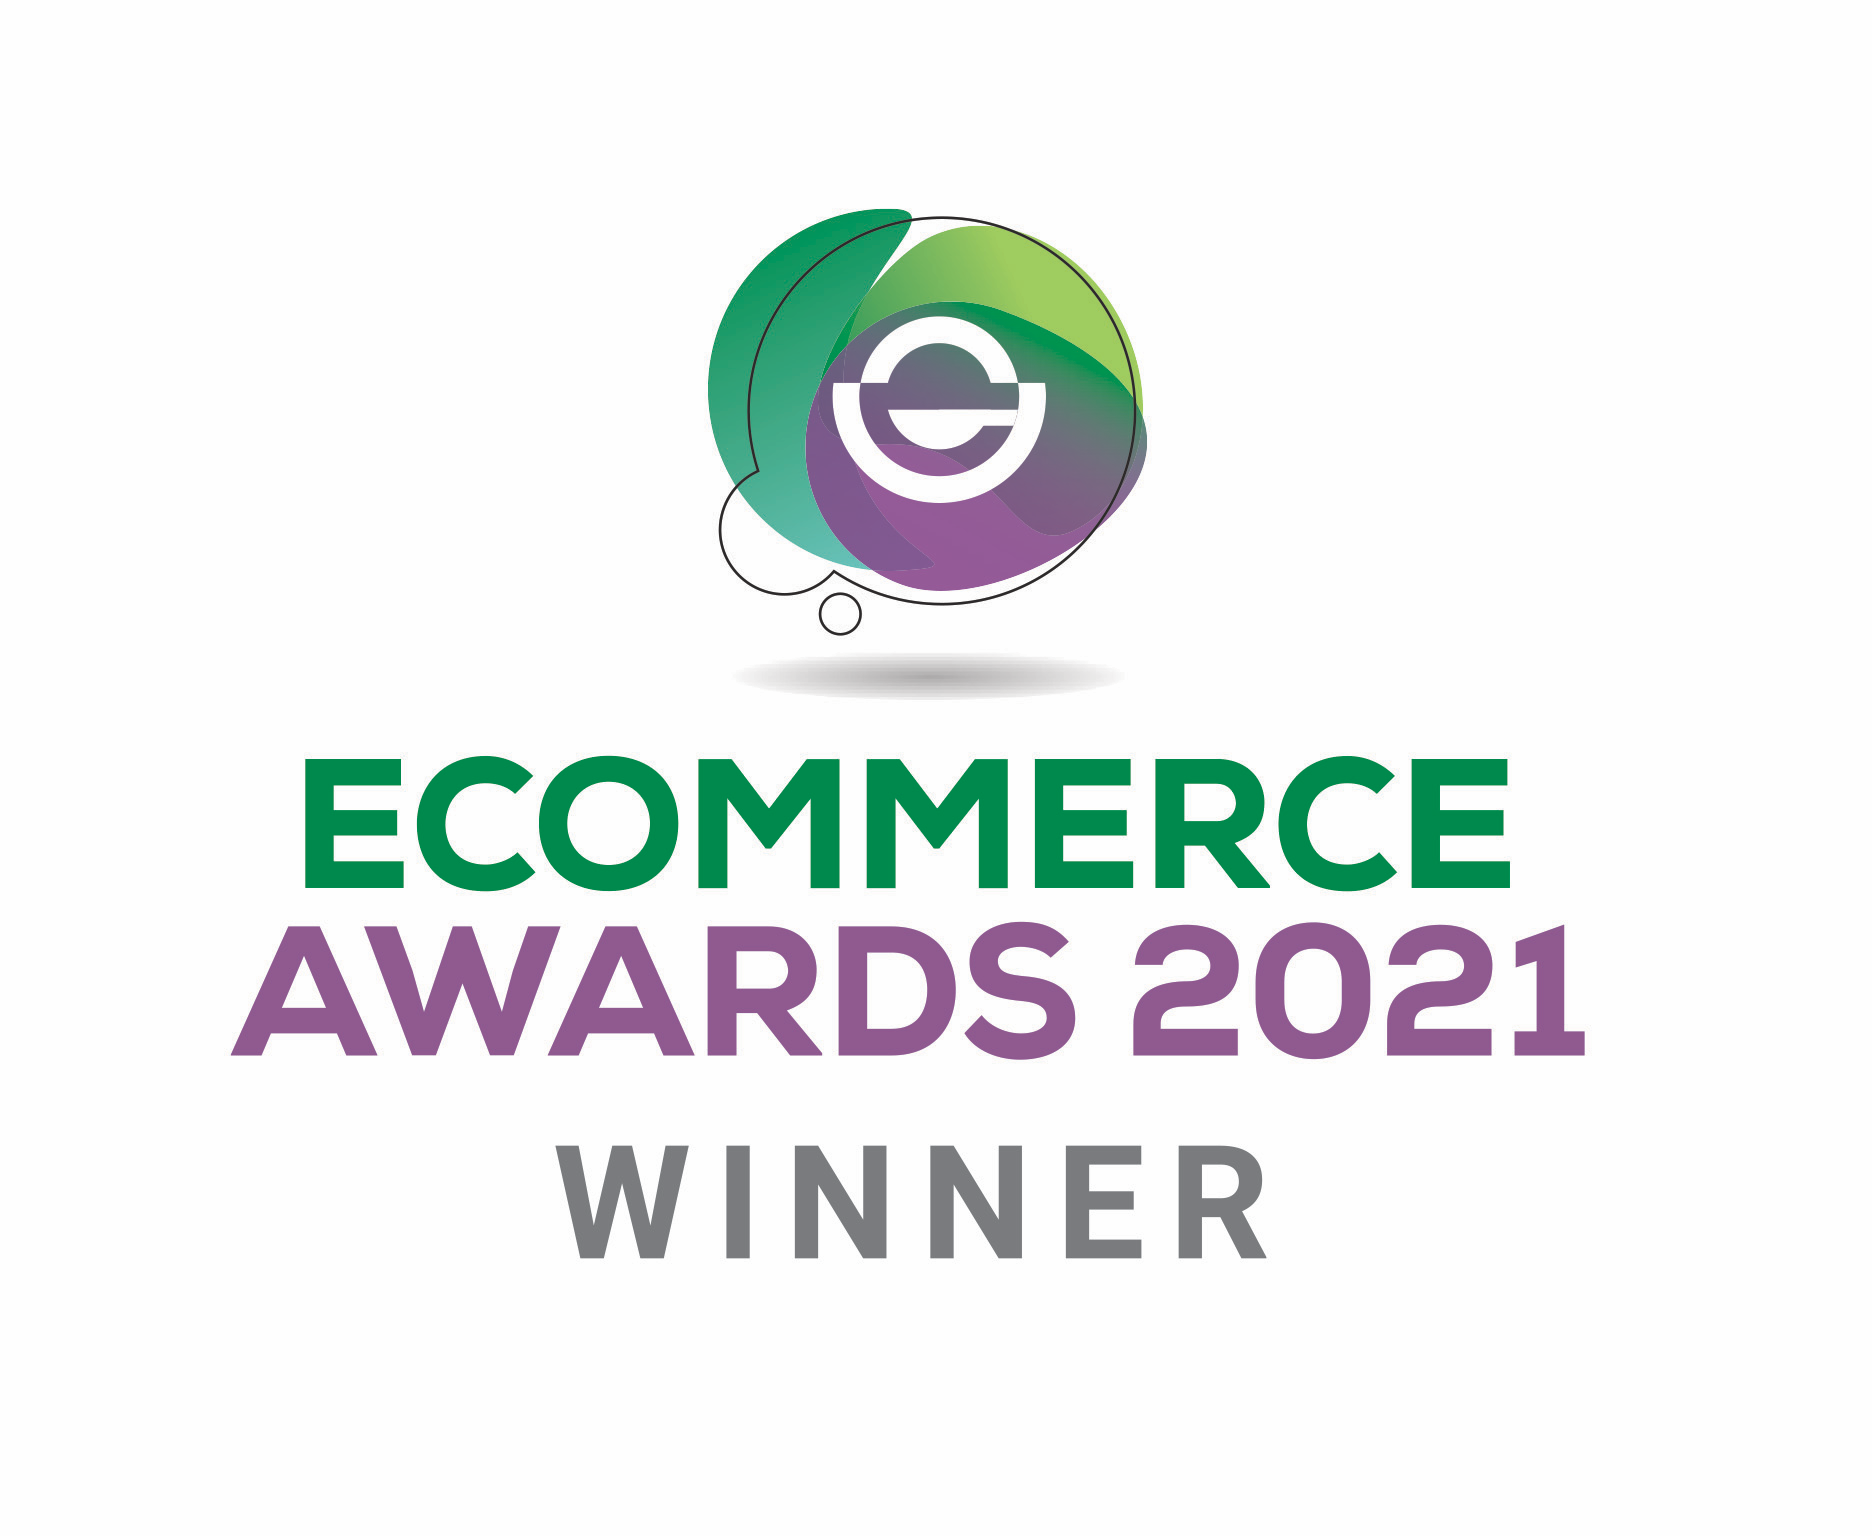 Greenlight Commerce project wins Best B2C eCommerce Site 2021